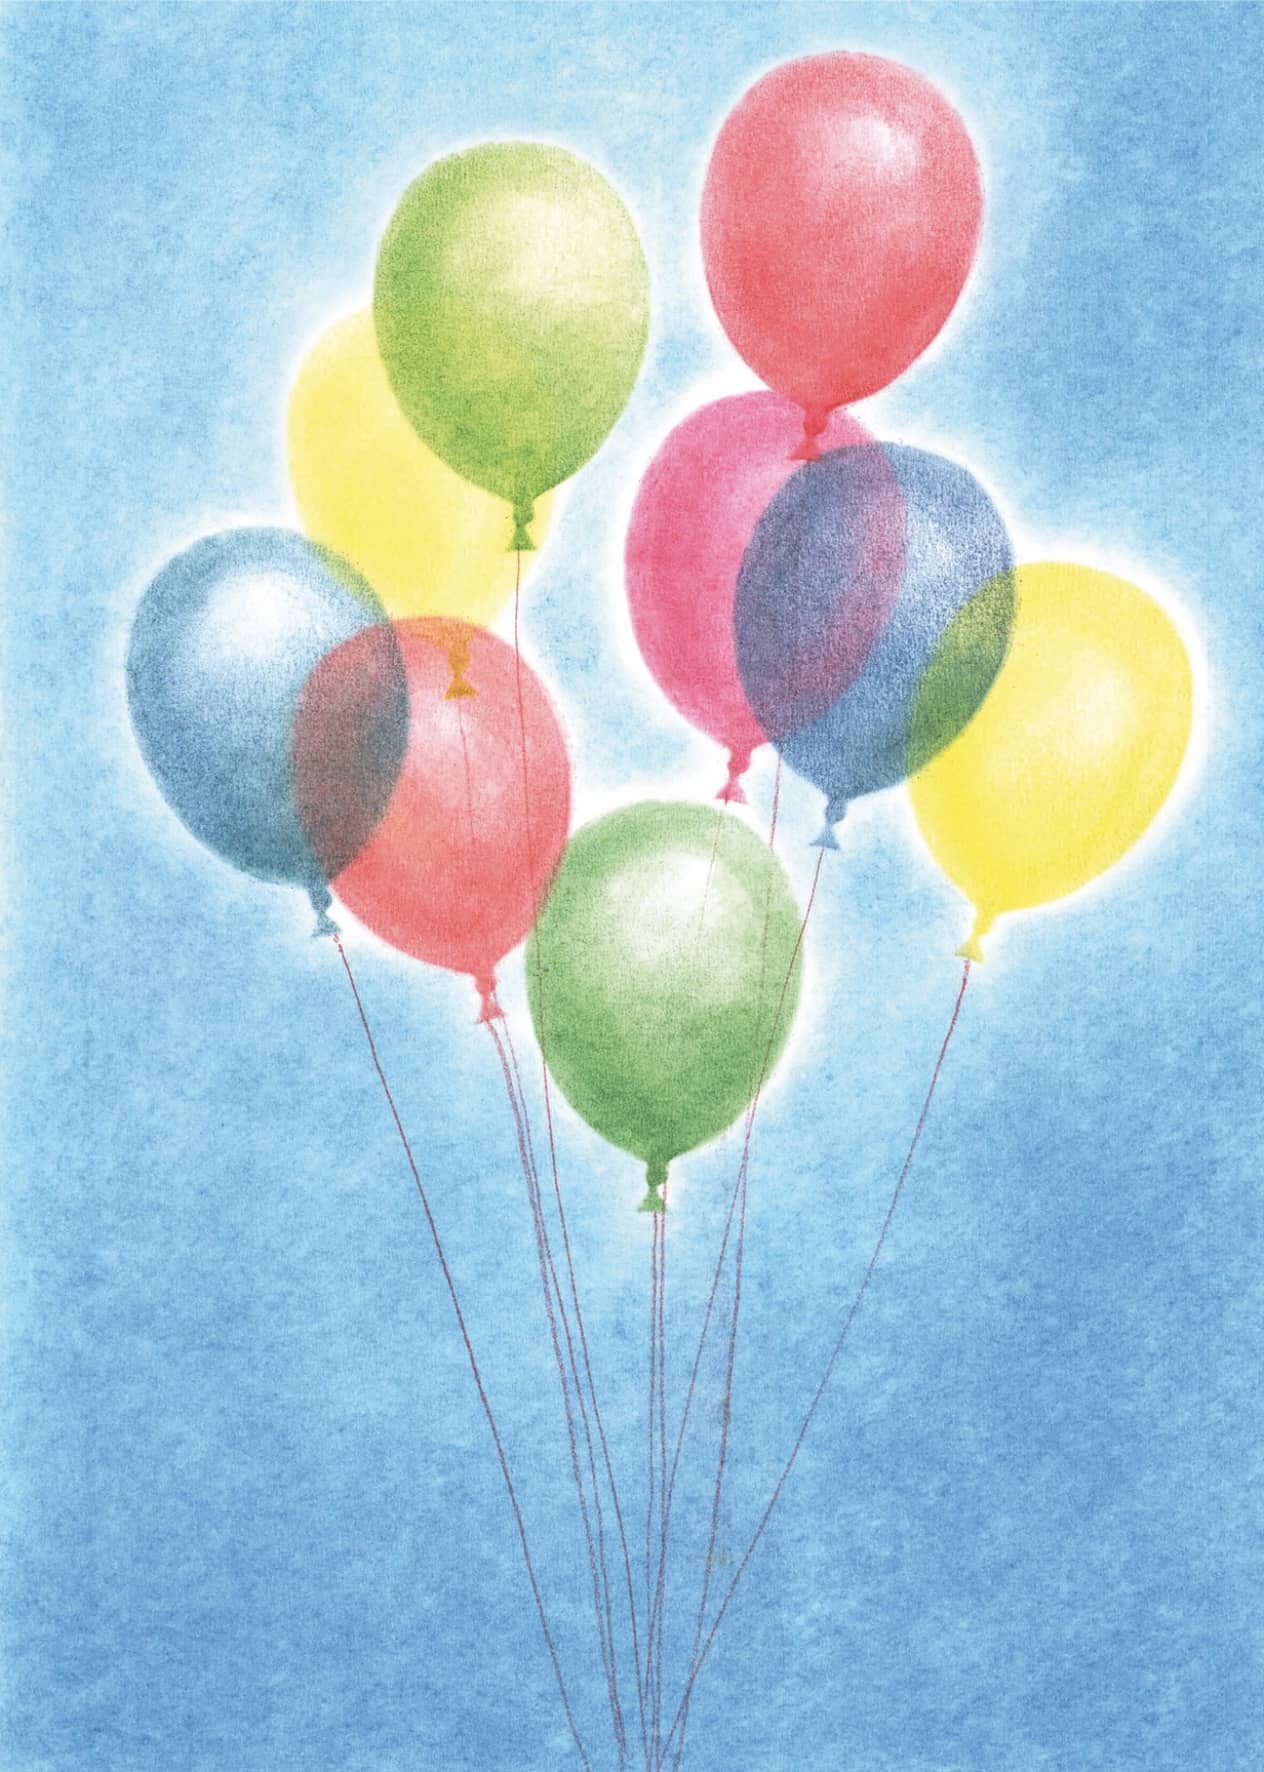 Colorful Seccorell balloons float in front of a blue sky, captured in fine Seccorell shades.